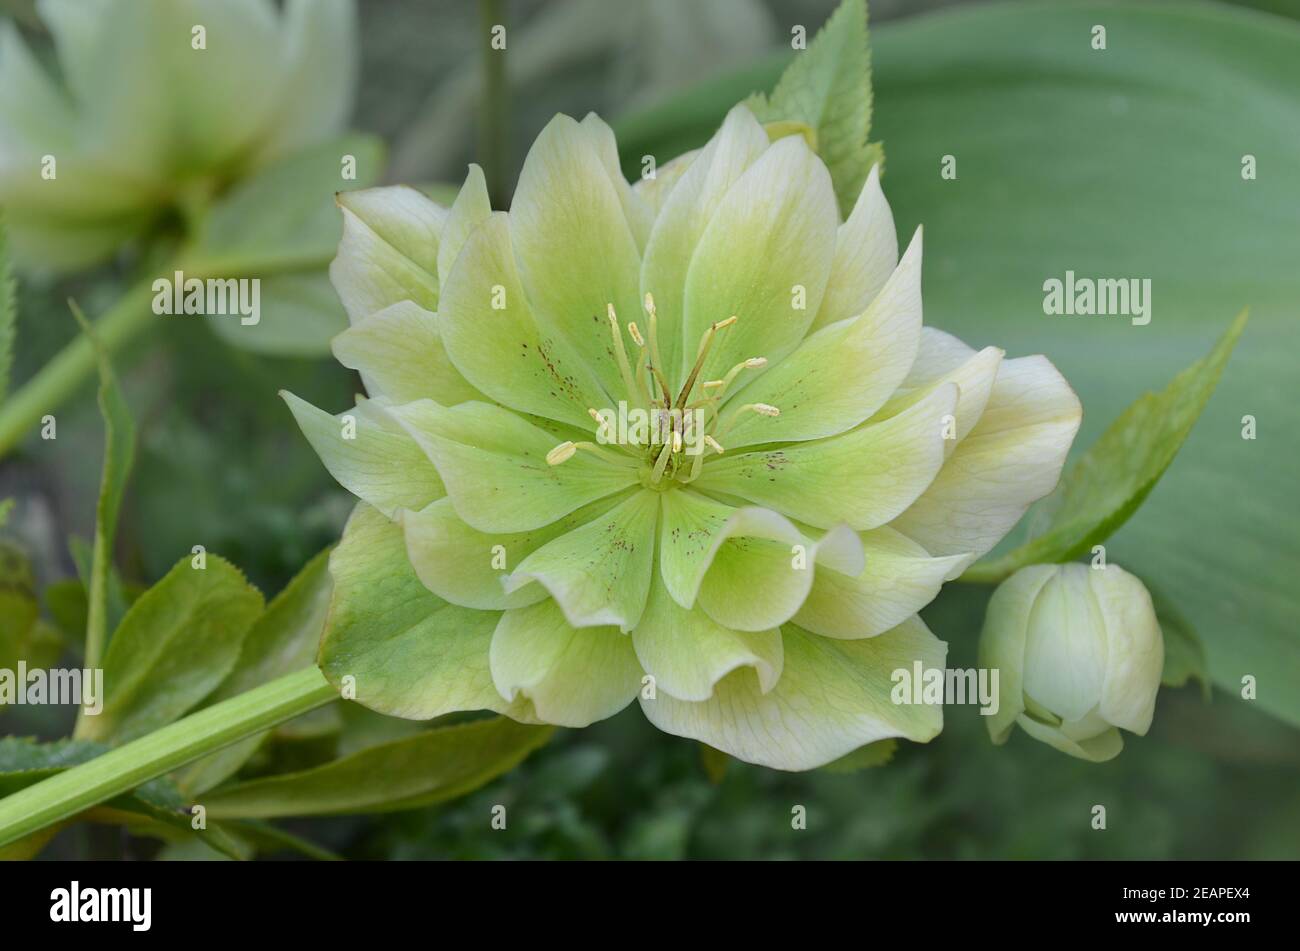 White flowers of hellebores. Evergreen perennial hellebore bloom in late winter to early spring.Christmas rose or hellebore spring flowers which posit Stock Photo